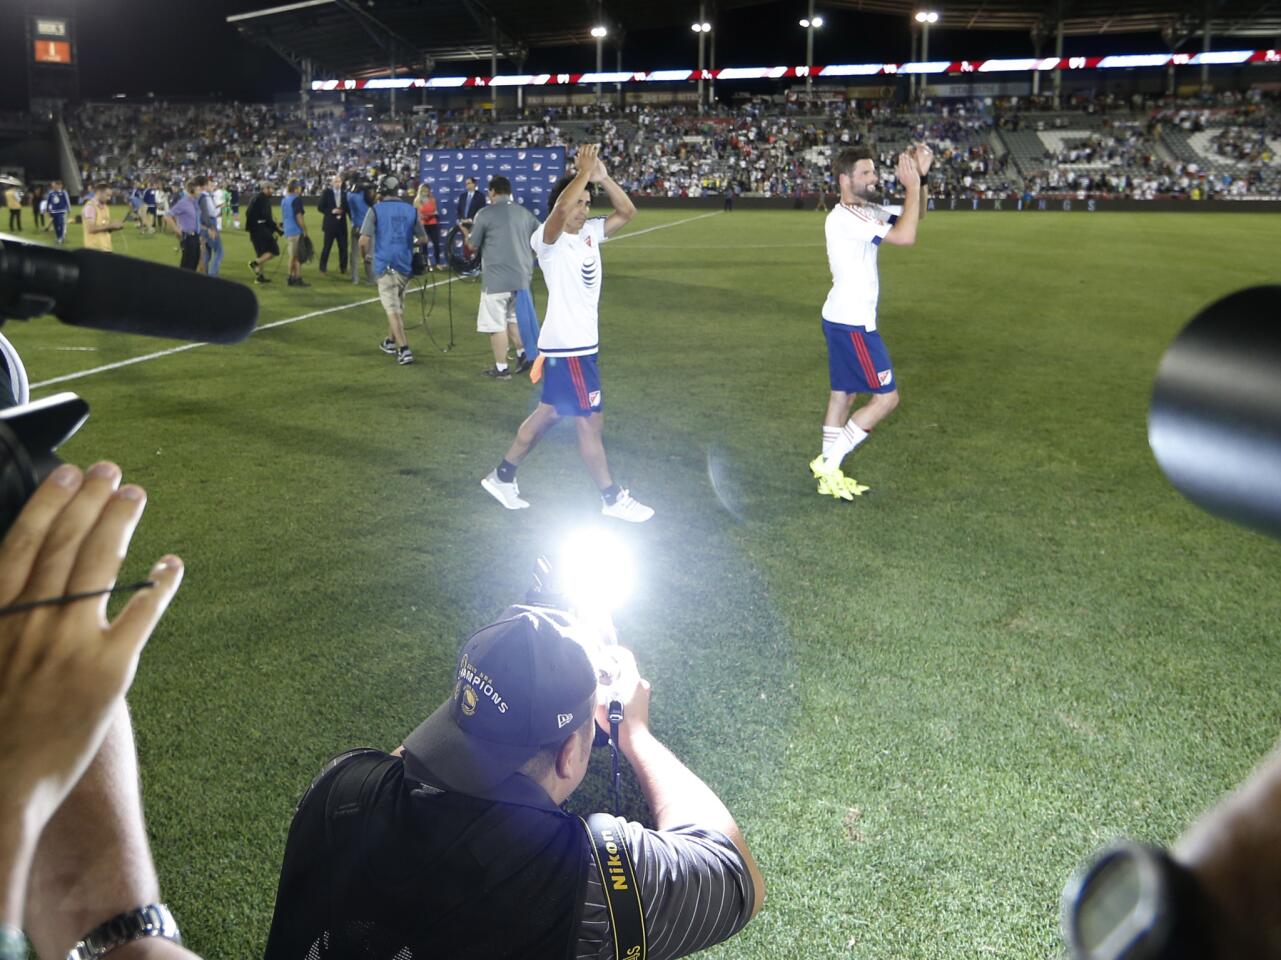 MLS All Star Game 2015